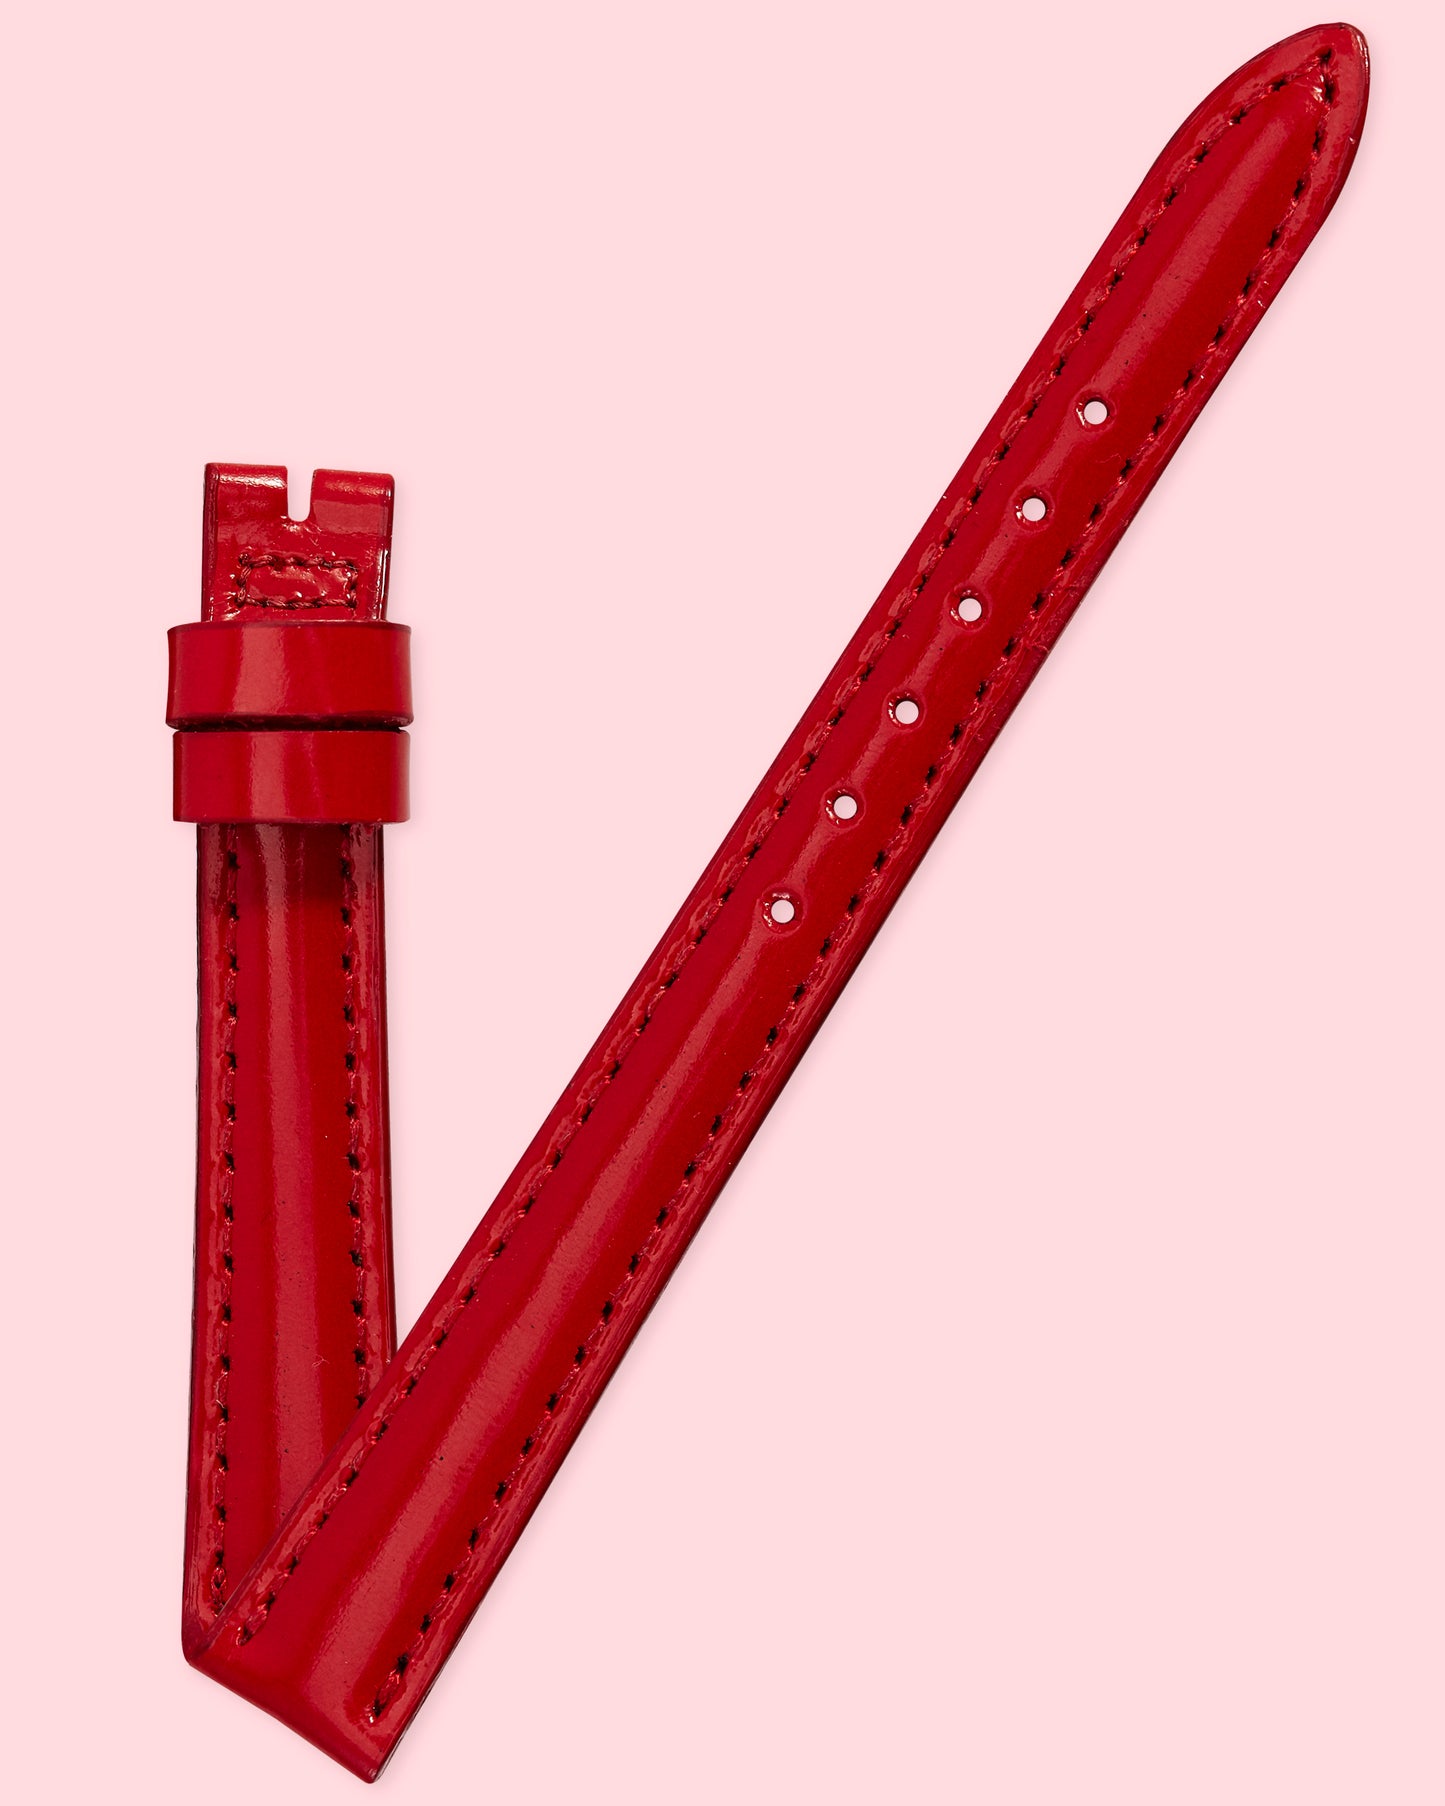 Ecclissi 12mm x 10mm Red Leather Ladies Strap 2070 21170